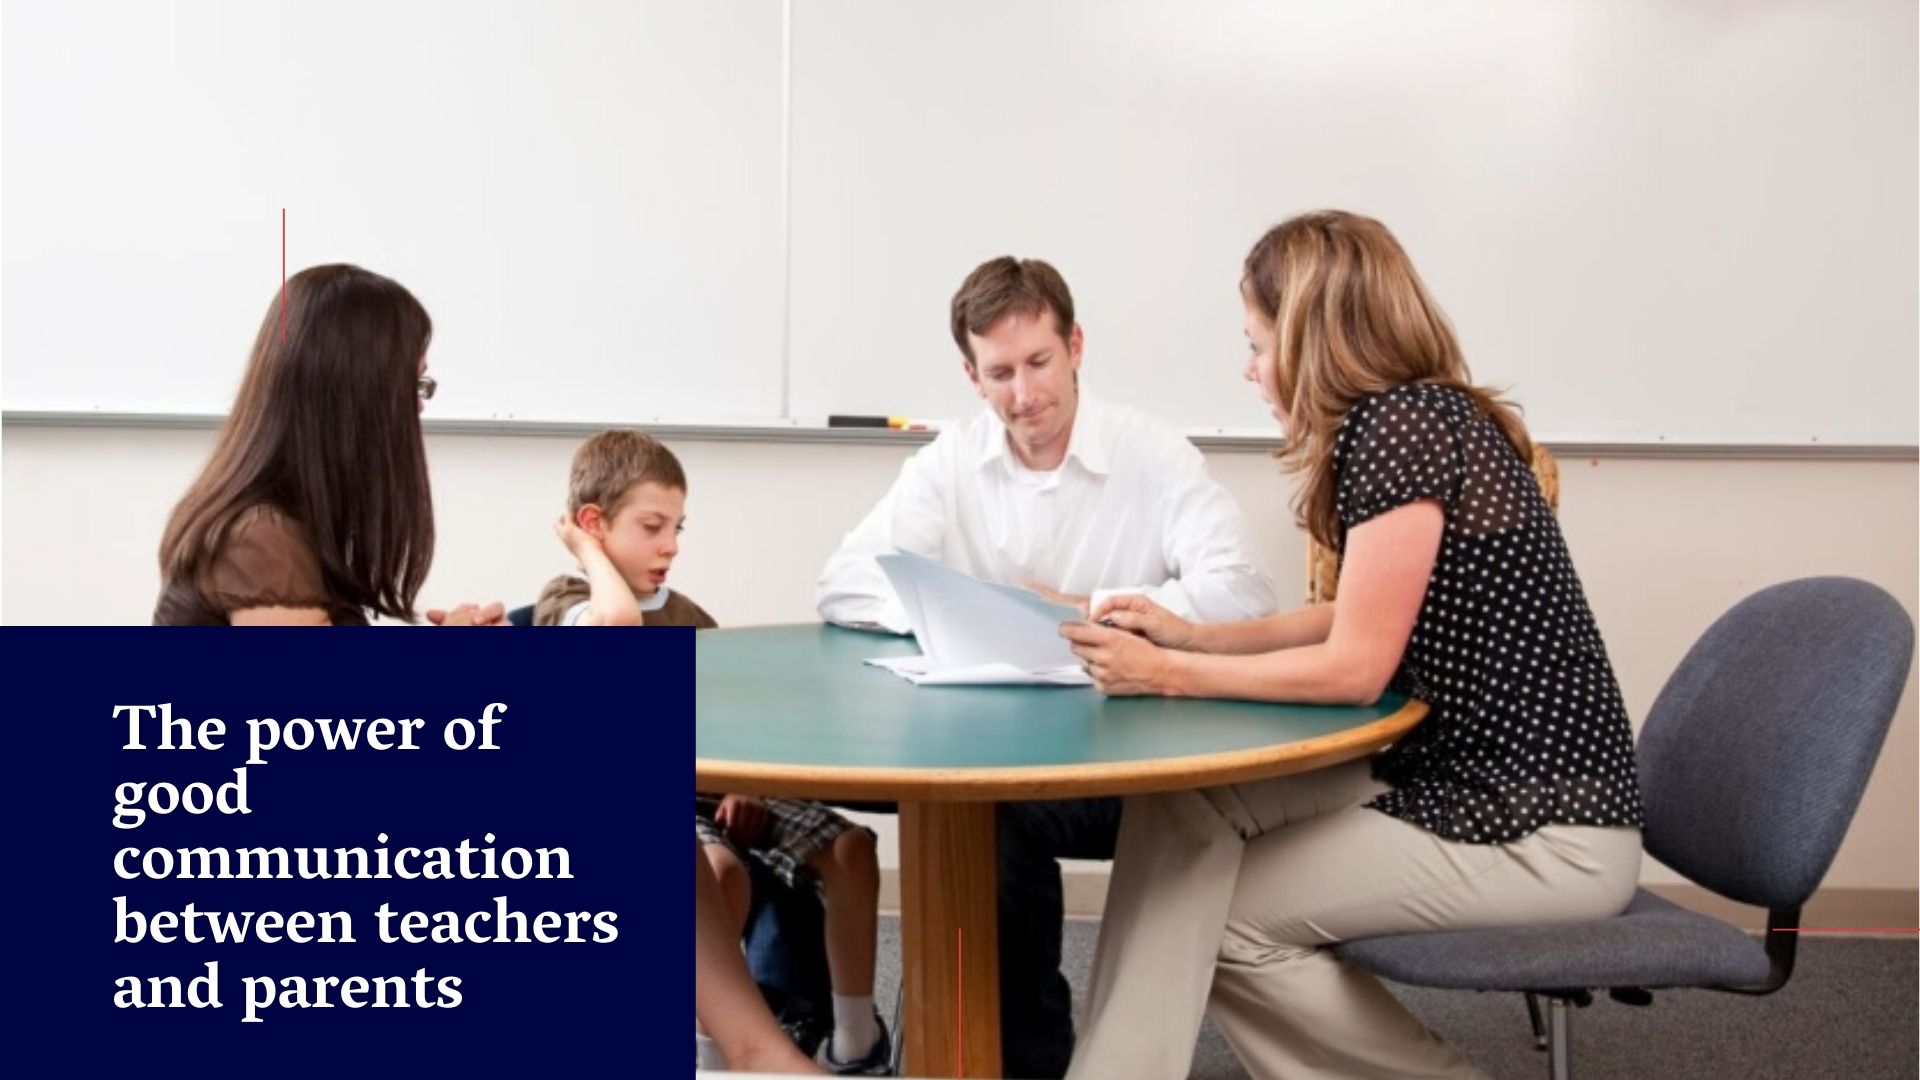 The power of good communication between teachers and parents